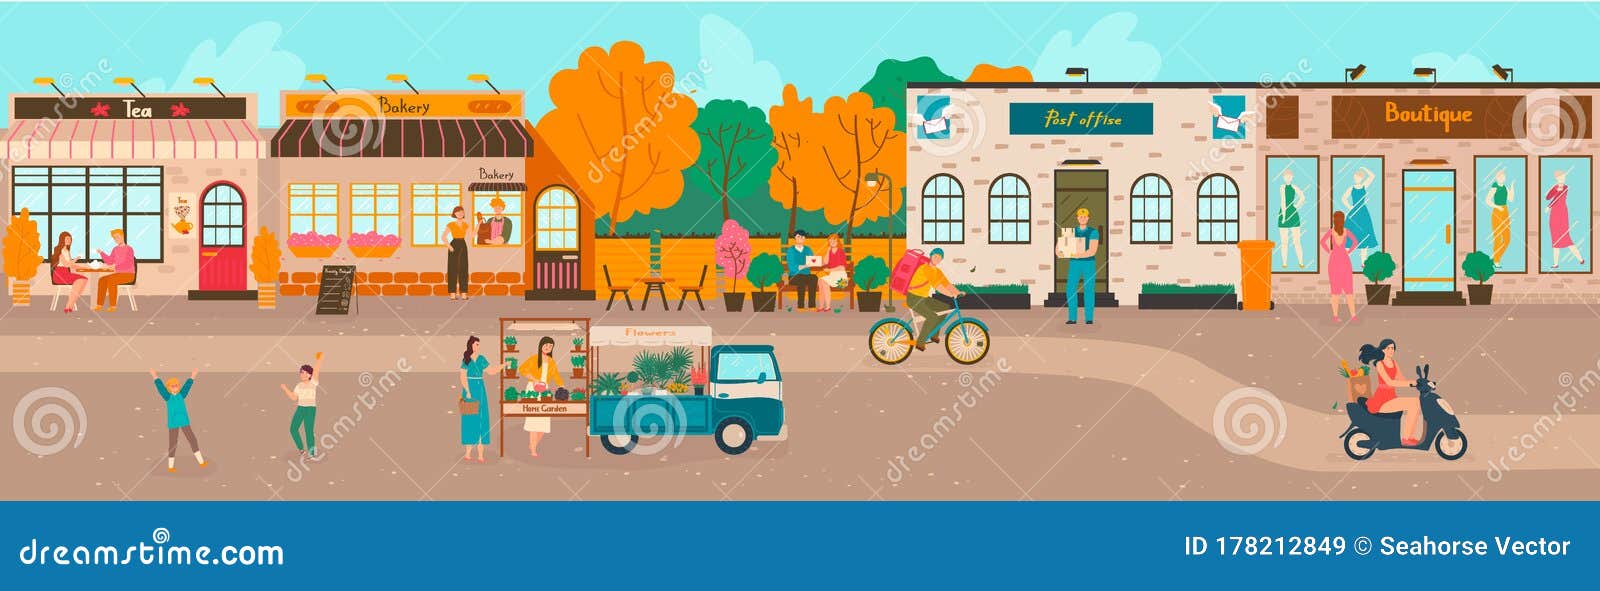 small town streets, people walking, houses of bakery, cafe and shops old european architecture cityscape cartoon 